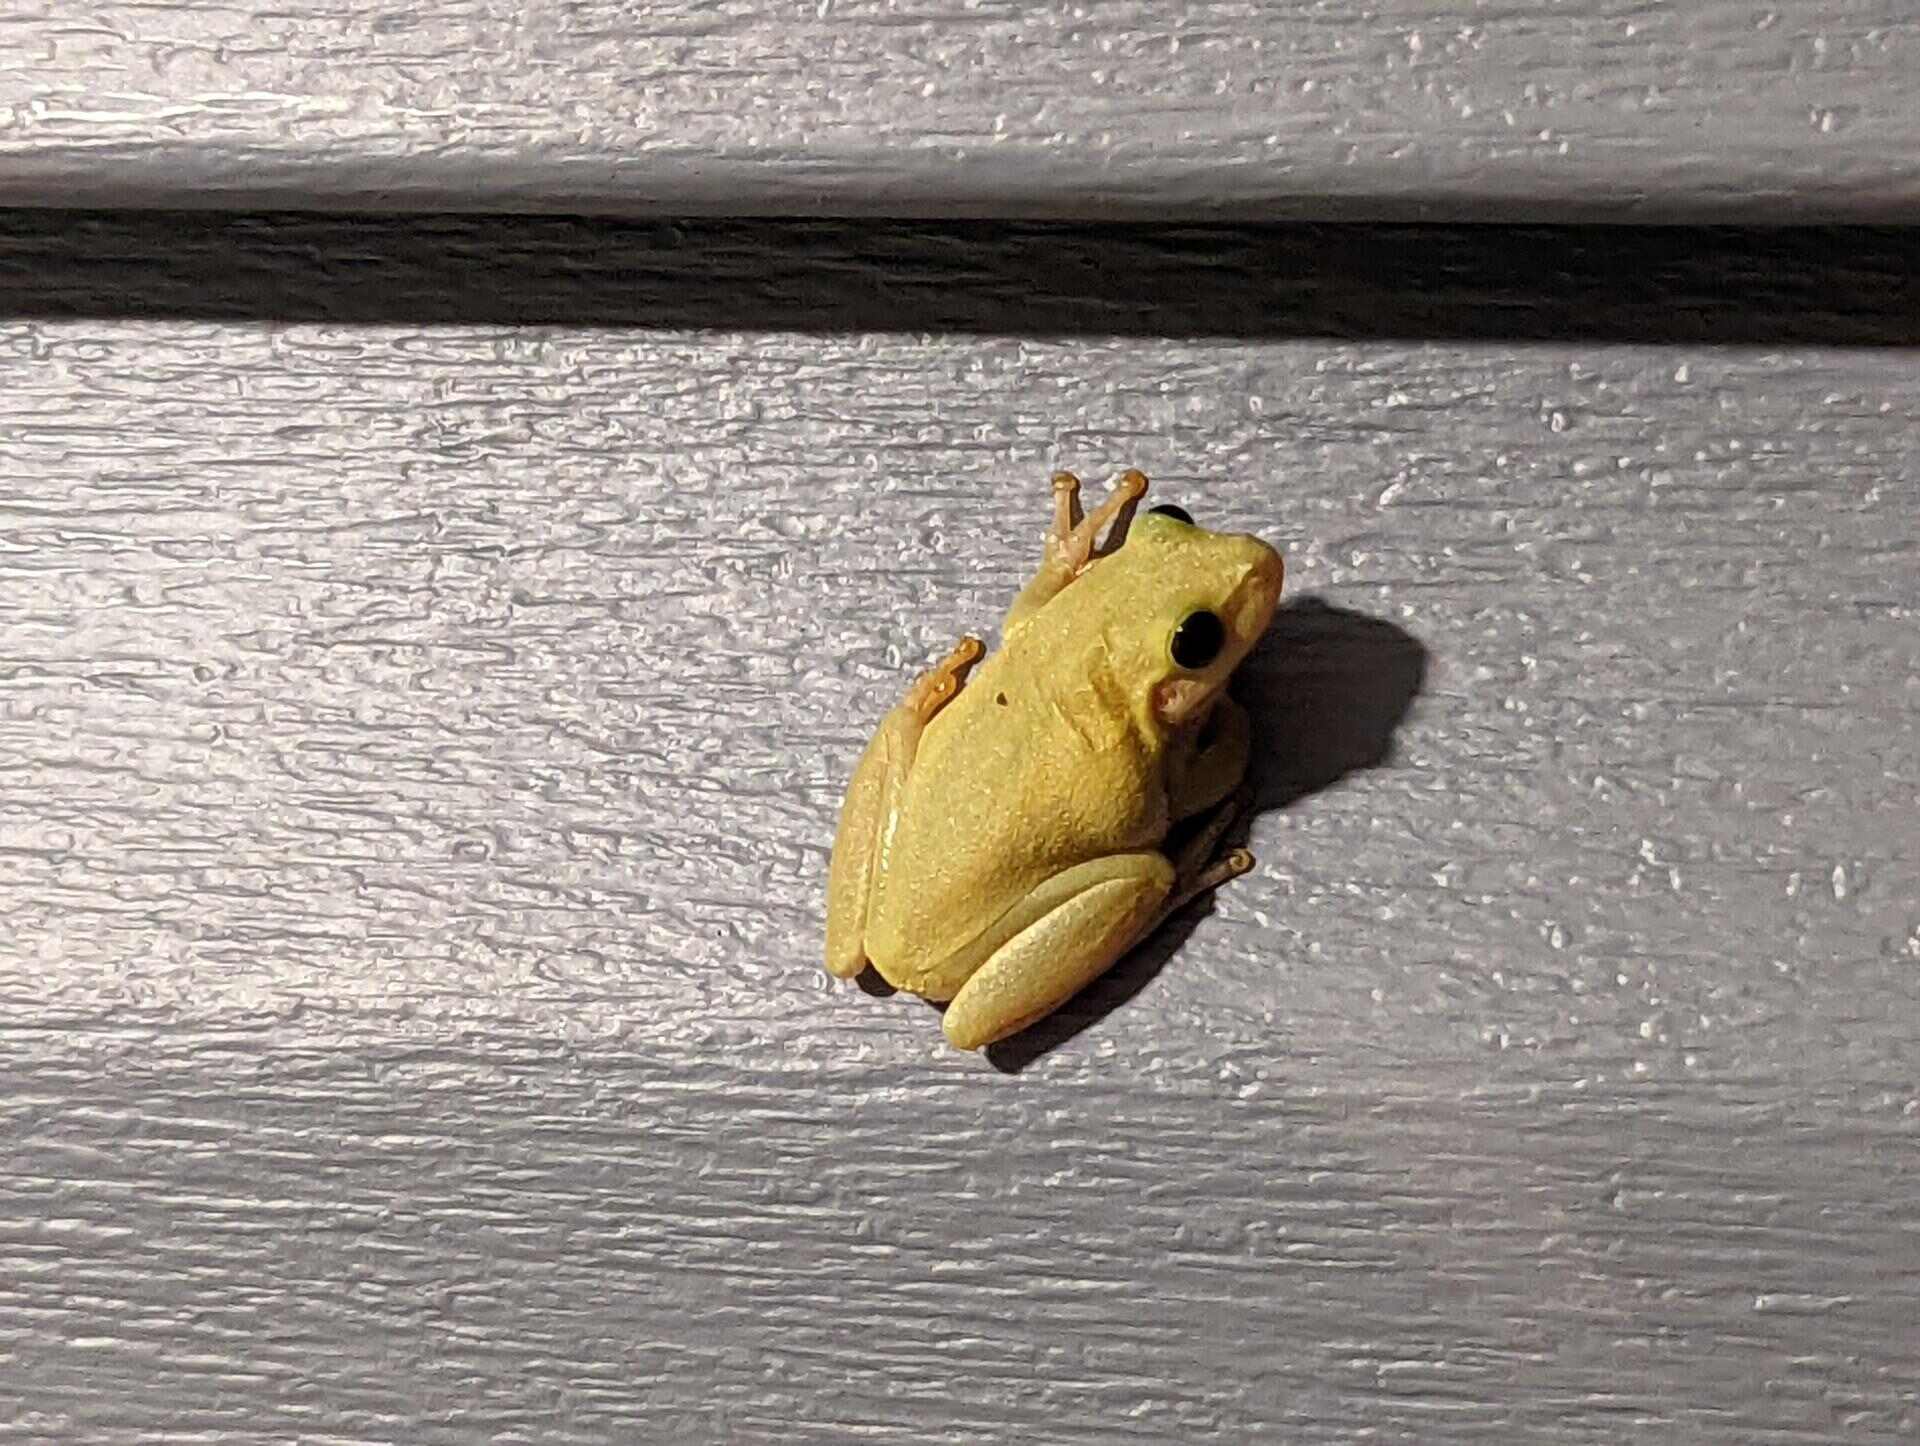 How To Get Rid Of Frogs On My Porch